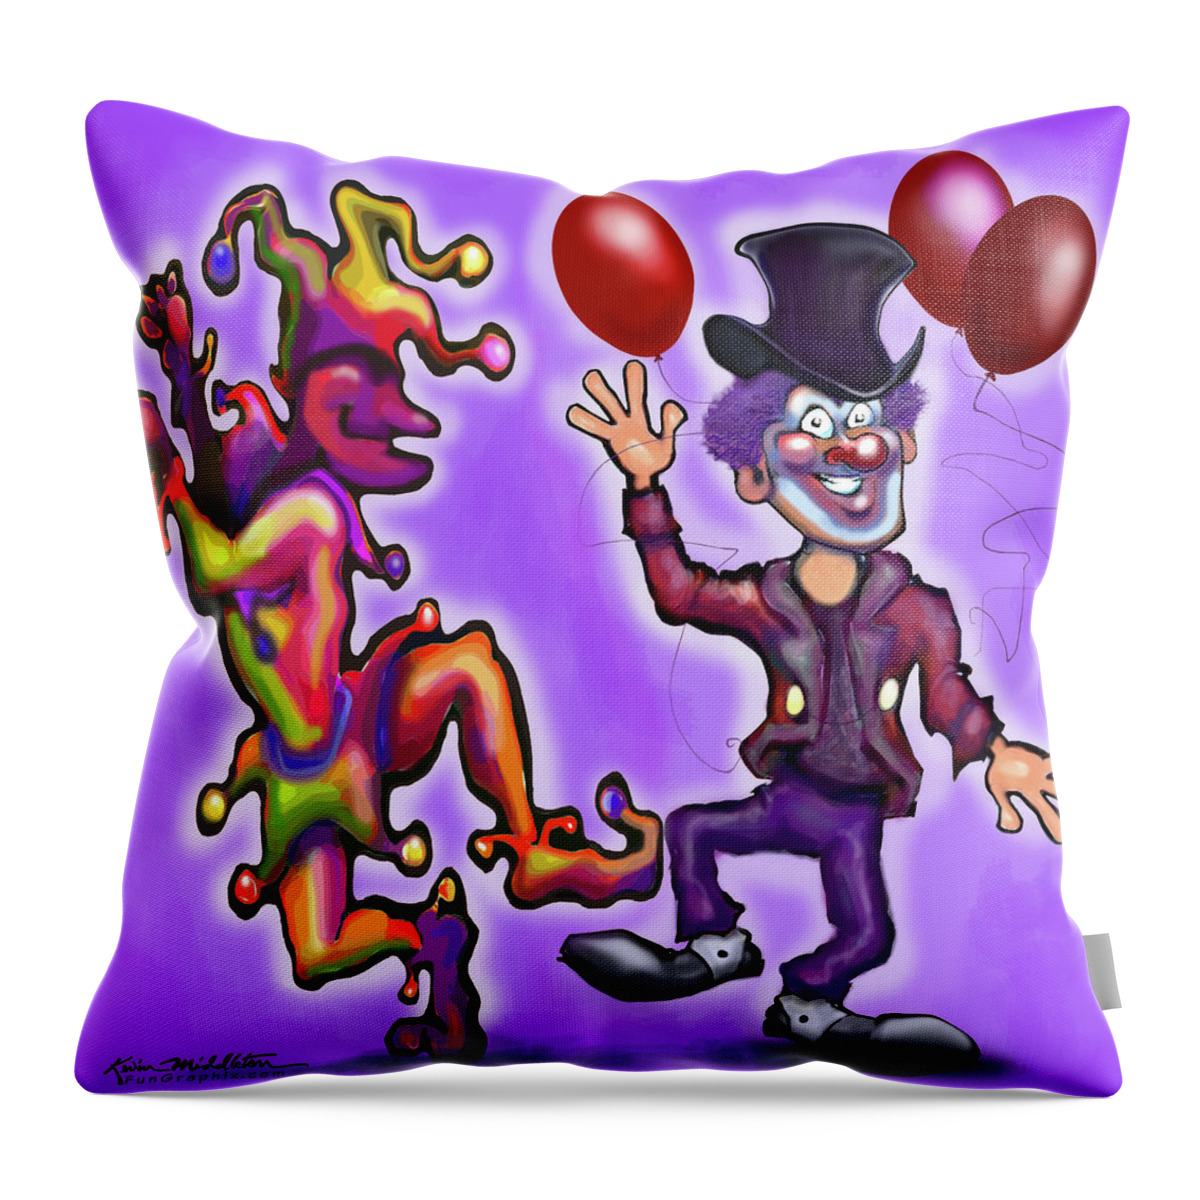 Clown Throw Pillow featuring the digital art Clowns by Kevin Middleton